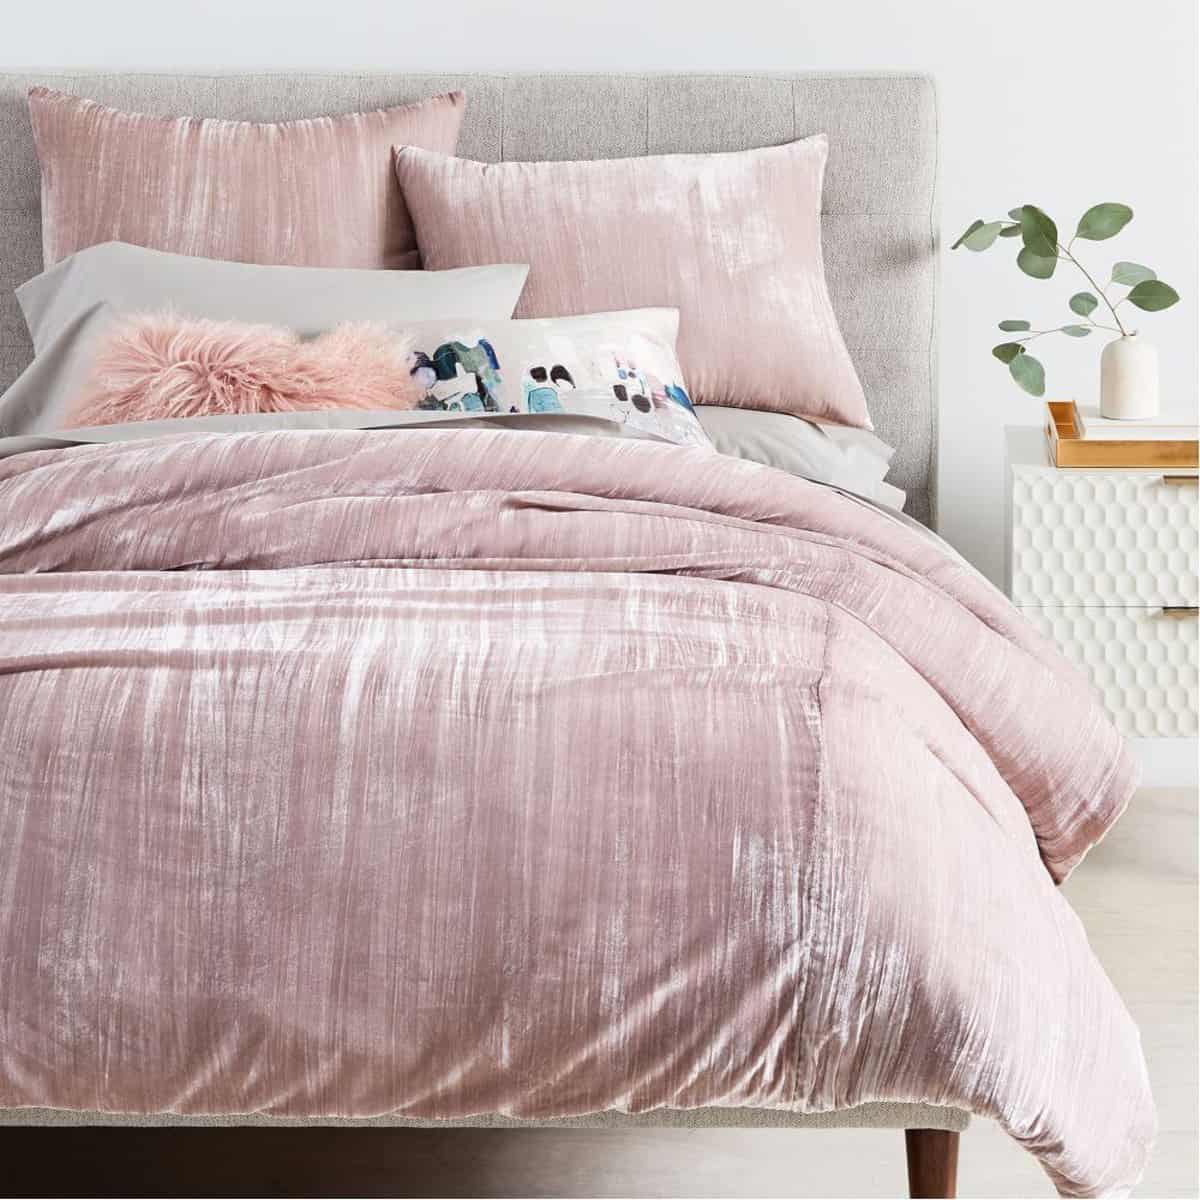 Its elegant, cozy and soft what more could anyone want from a bedding right?